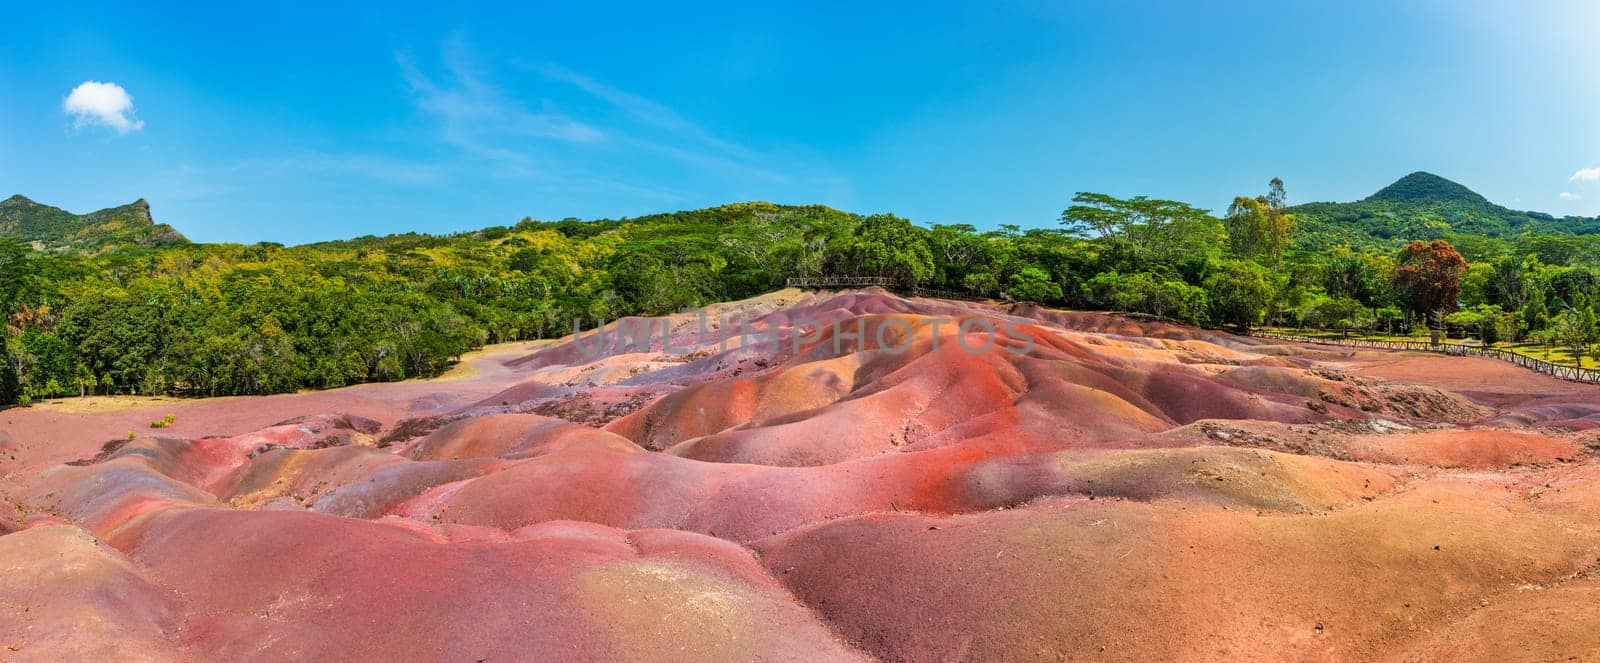 Chamarel Seven Colored Earth Geopark in Mauritius Island. Colorful panoramic landscape about this volcanic geological formation Chamarel Seven Colored Earth Geopark in Riviere noire district.